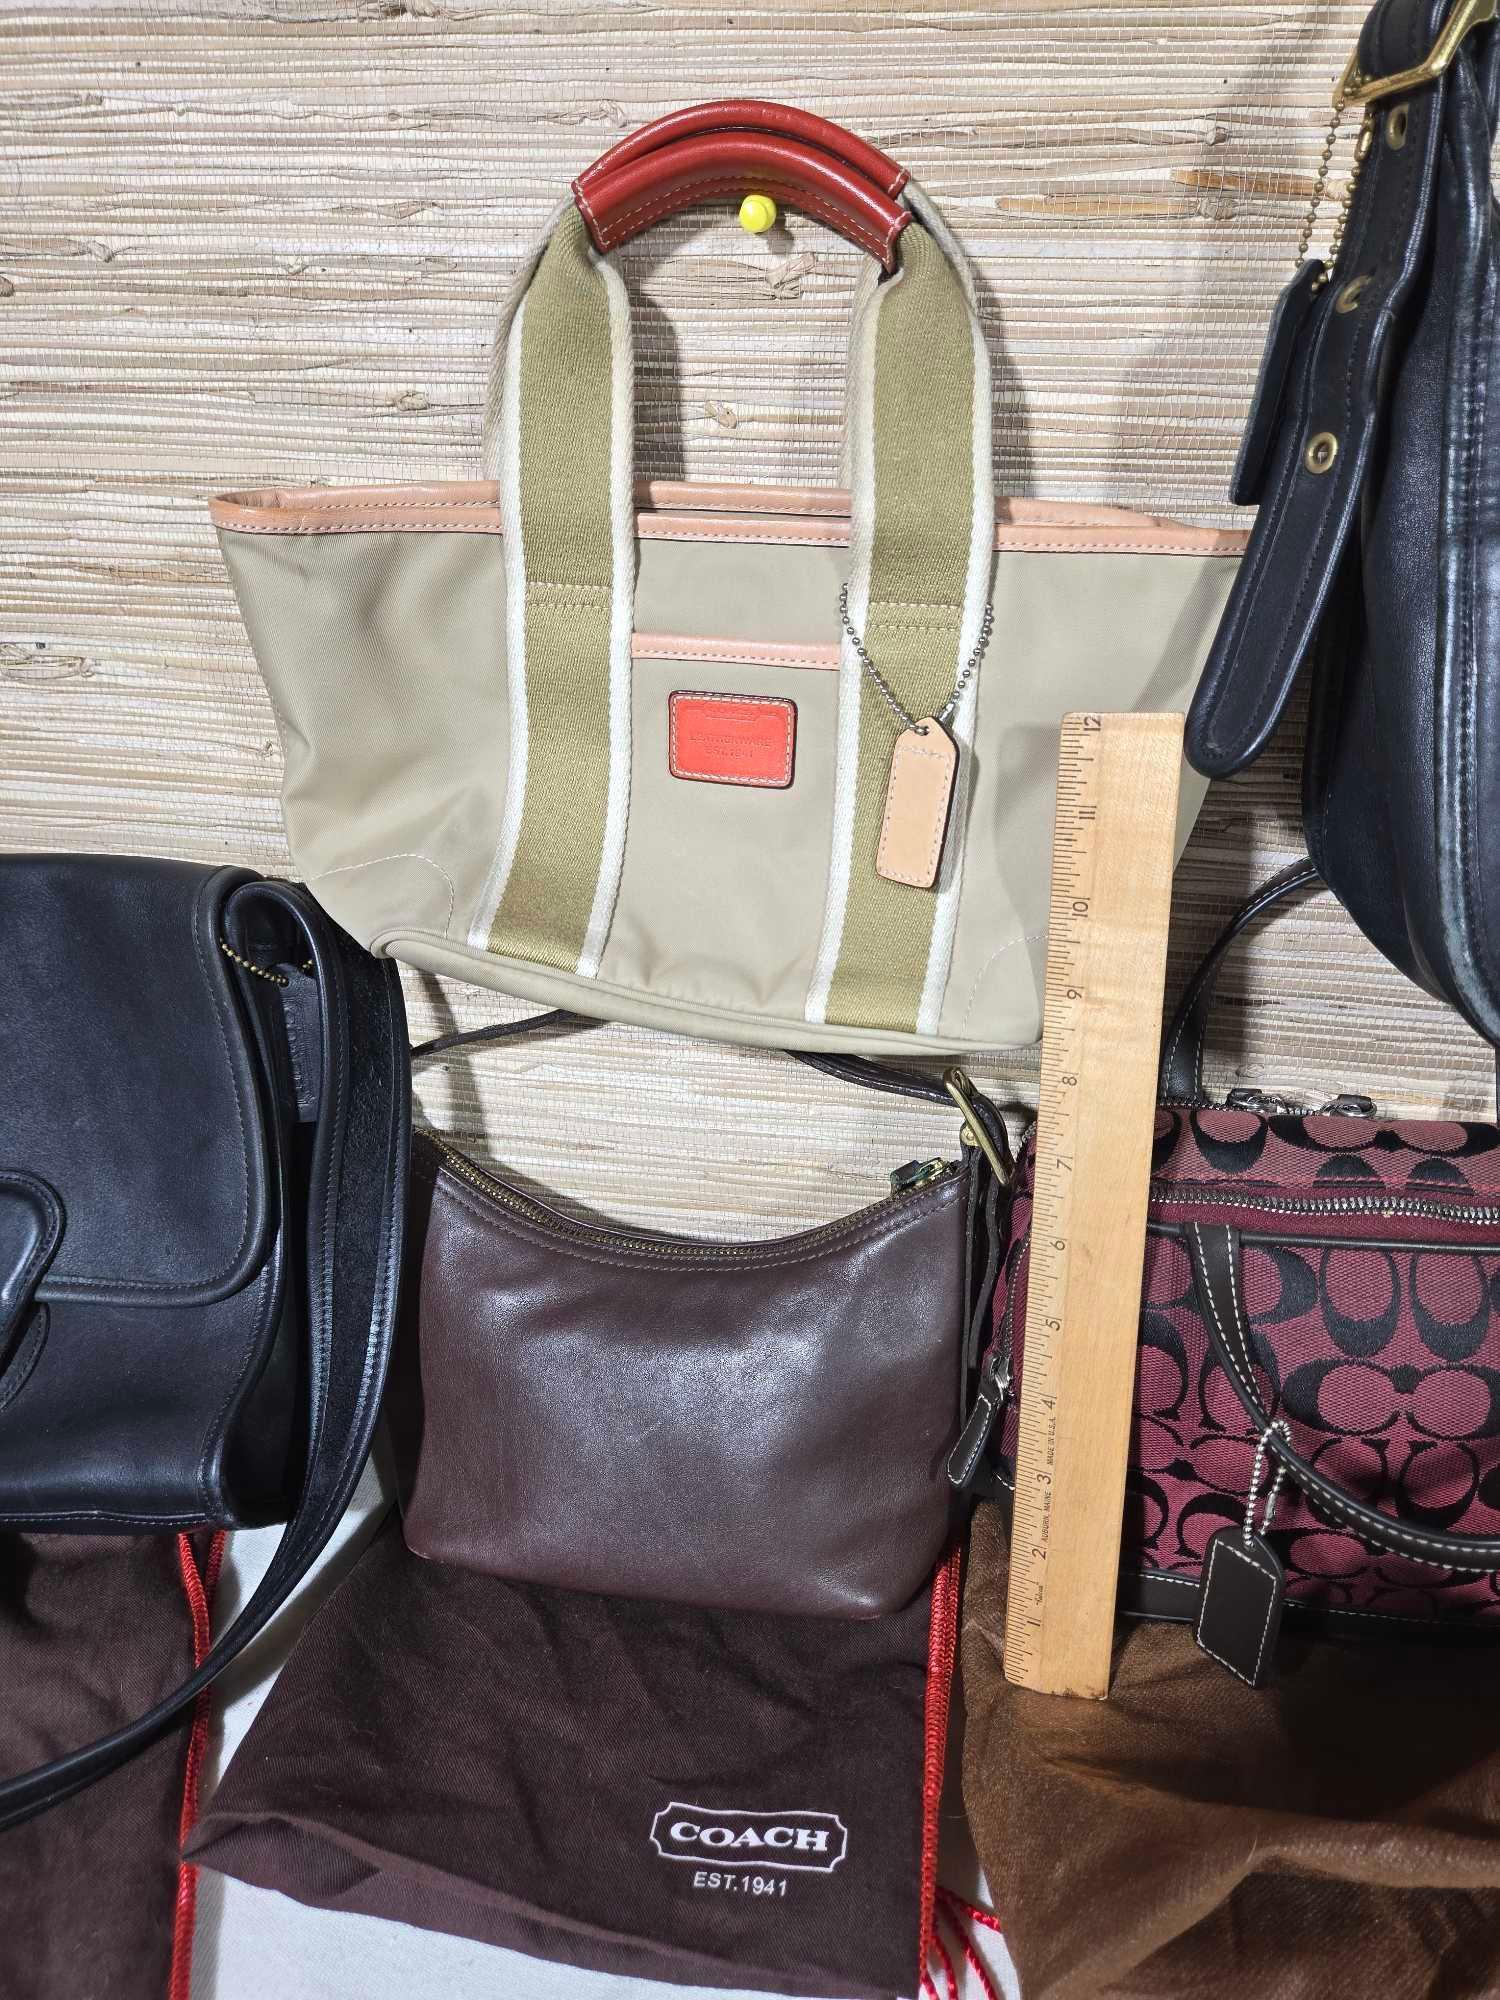 Collection of Mostly Vintage Coach Leather Handbags